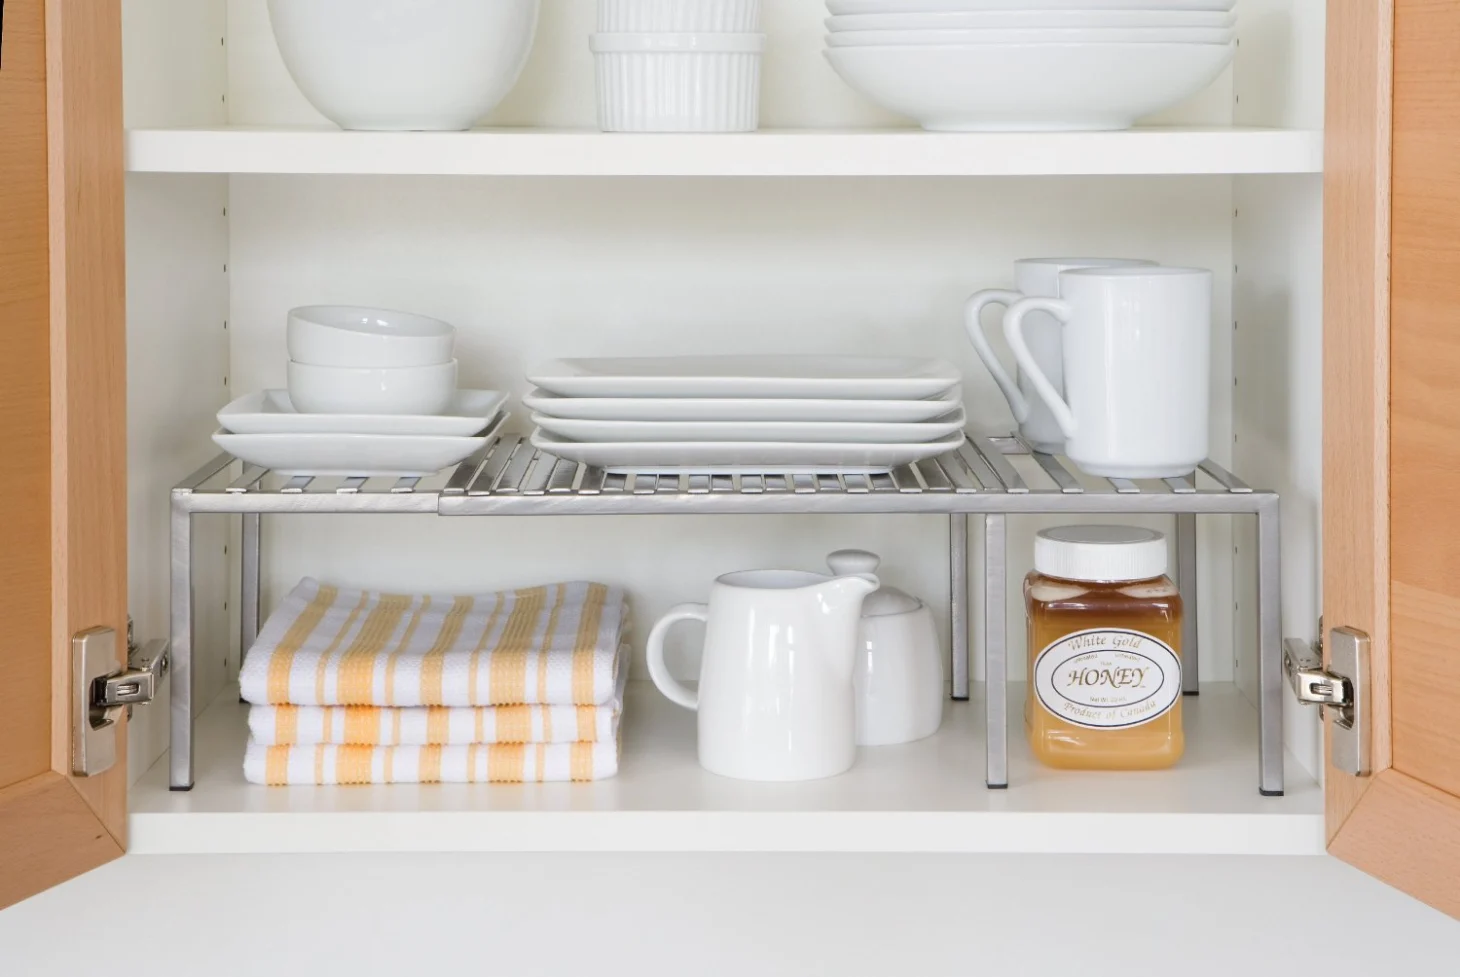 How To Organize Dishes In Kitchen Cabinets